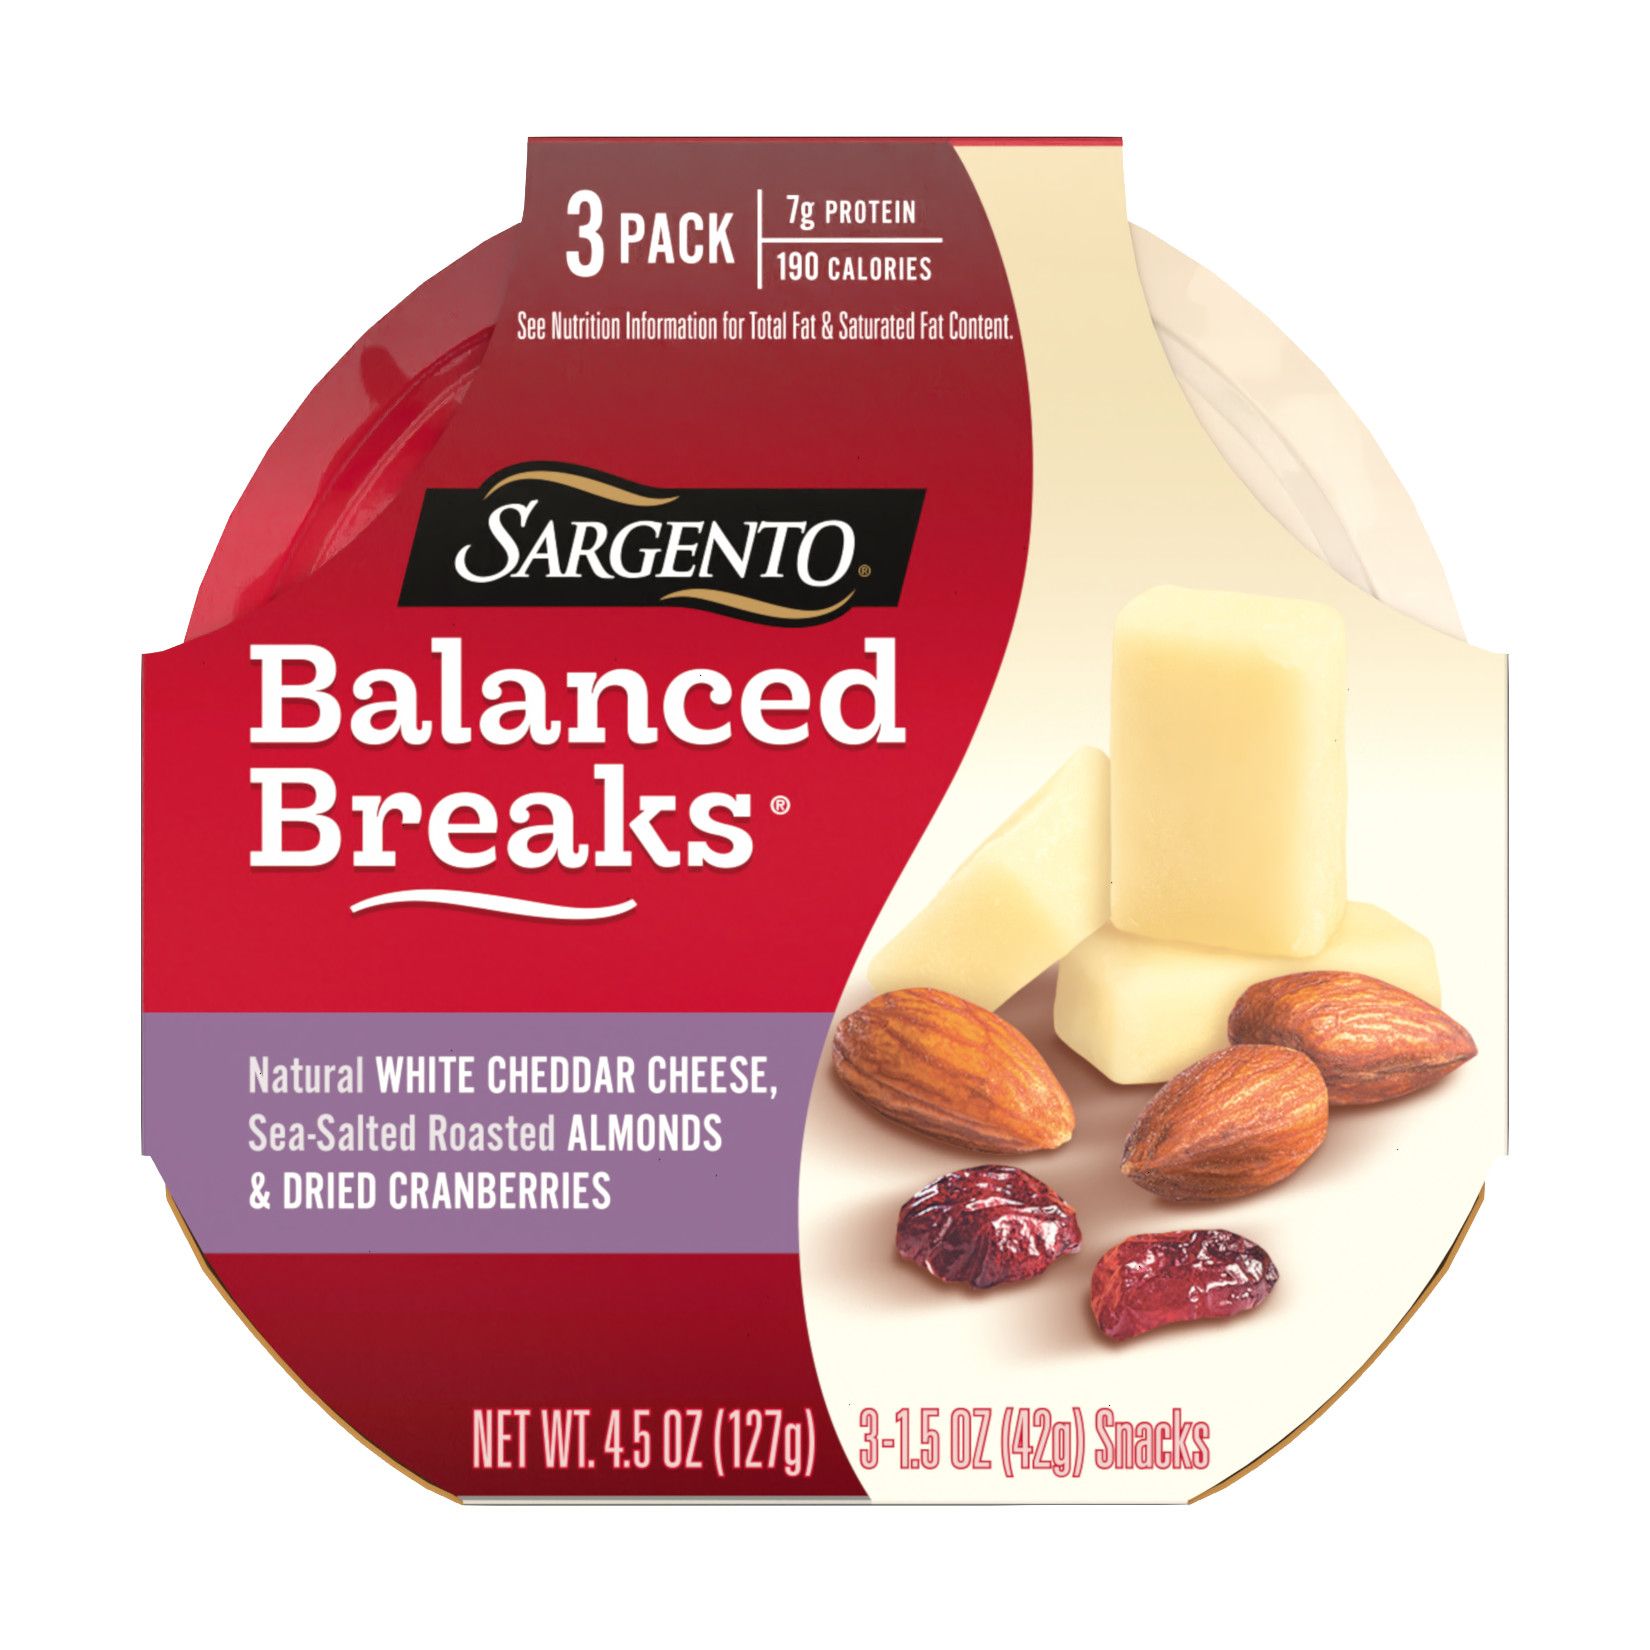 White Cheddar Cheese, Sea Salted Roasted Almonds, and Dried Cranberries